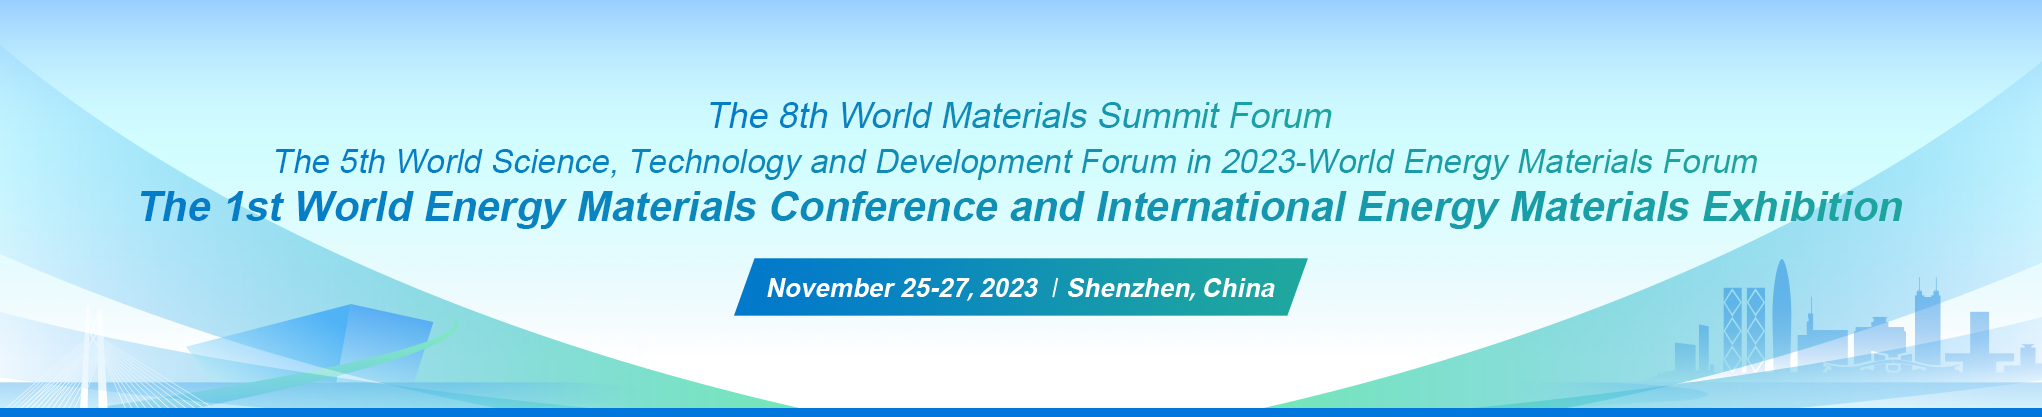 1st World Energy Materials Conference